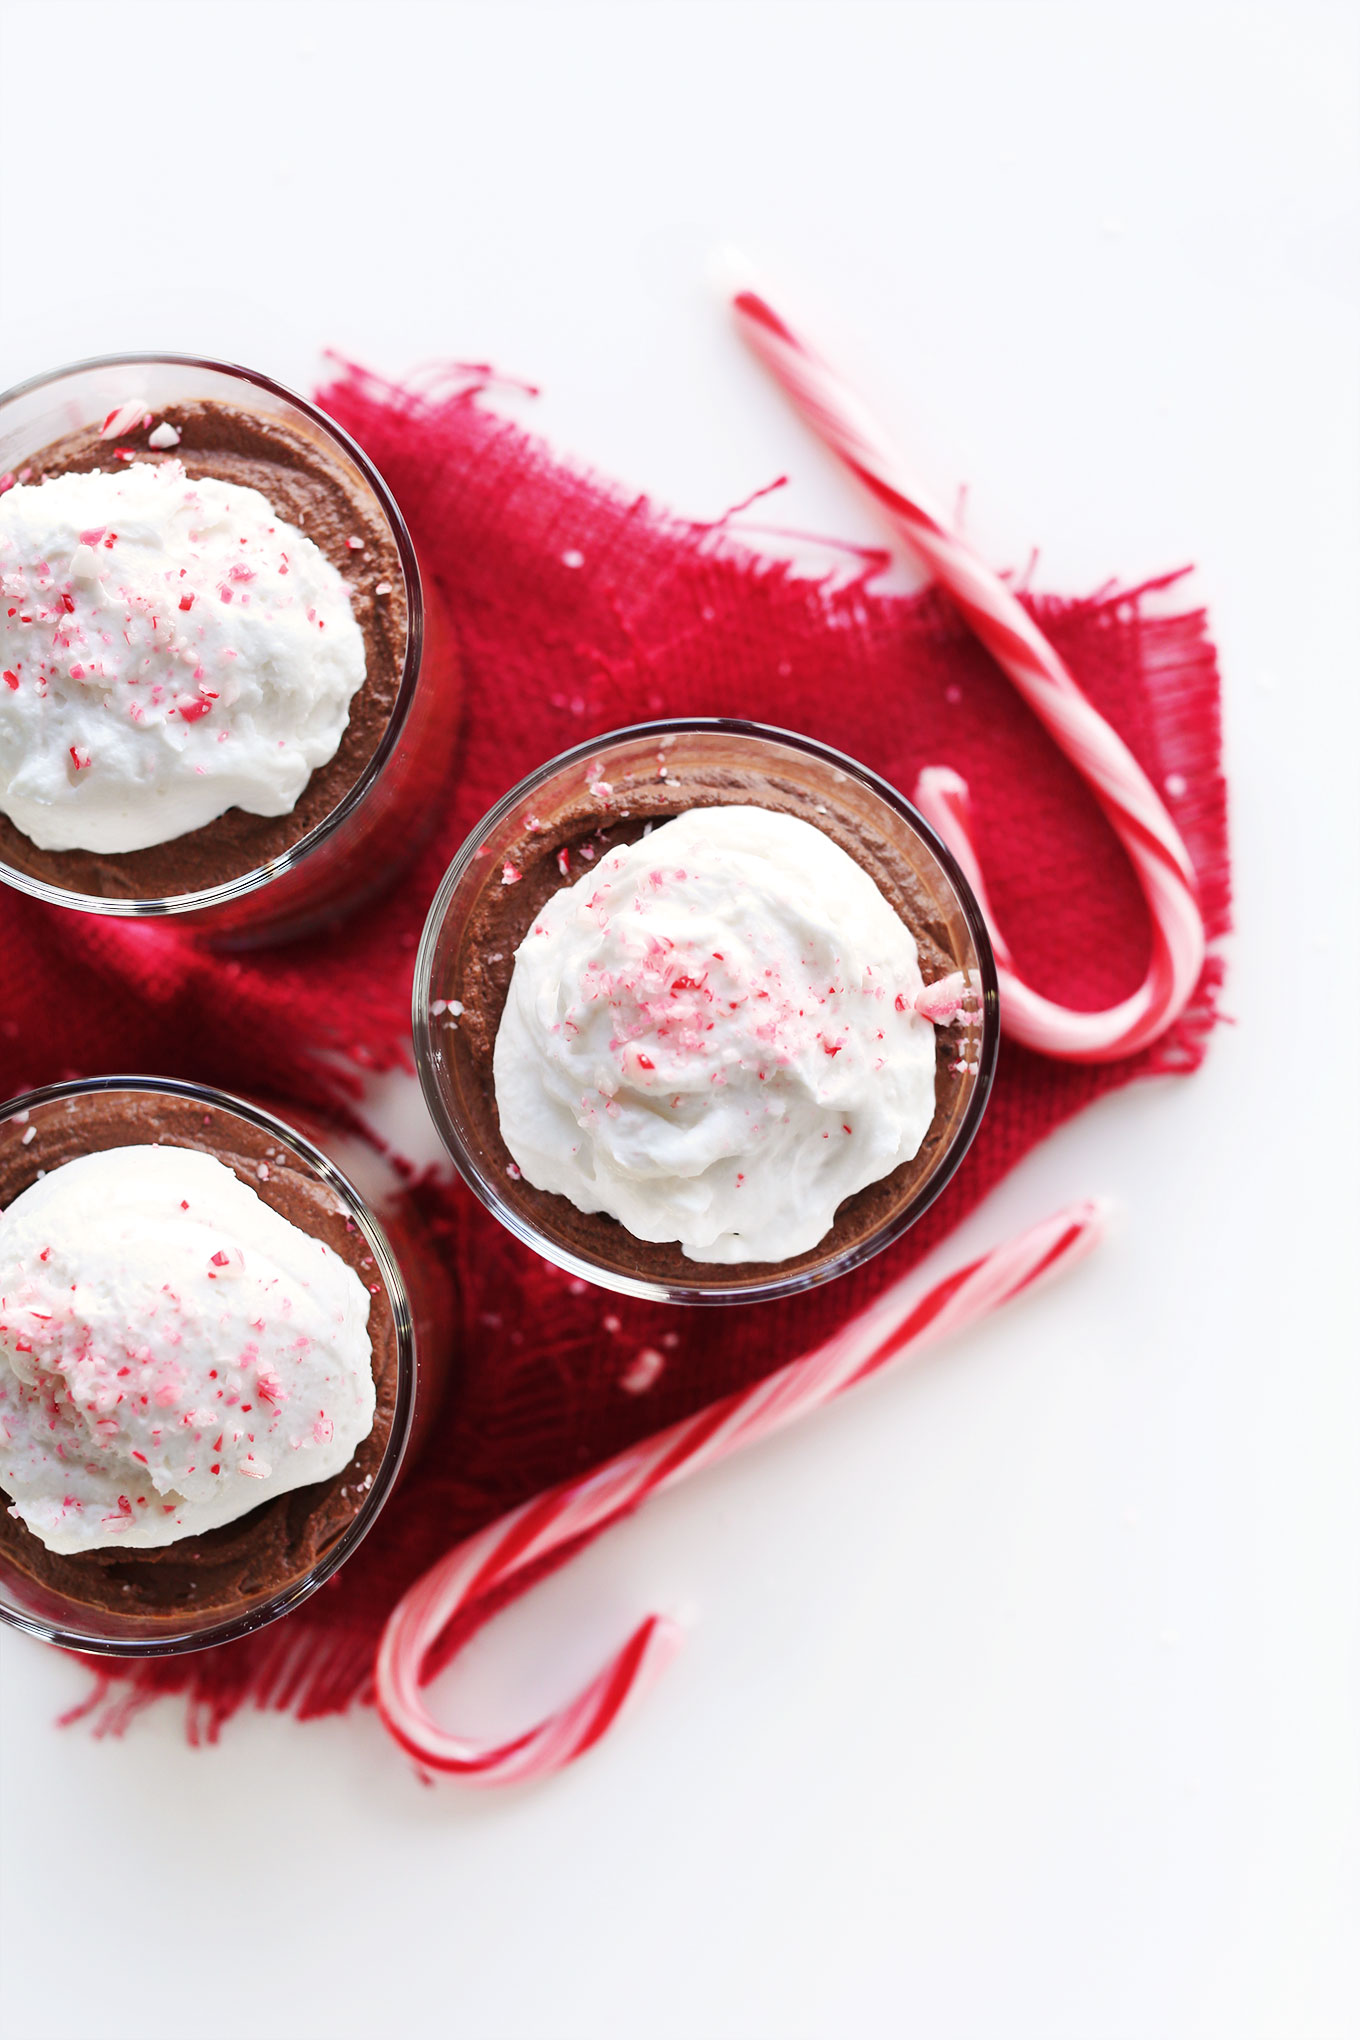 Jars filled with our Vegan Dark Chocolate Peppermint Mousse recipe